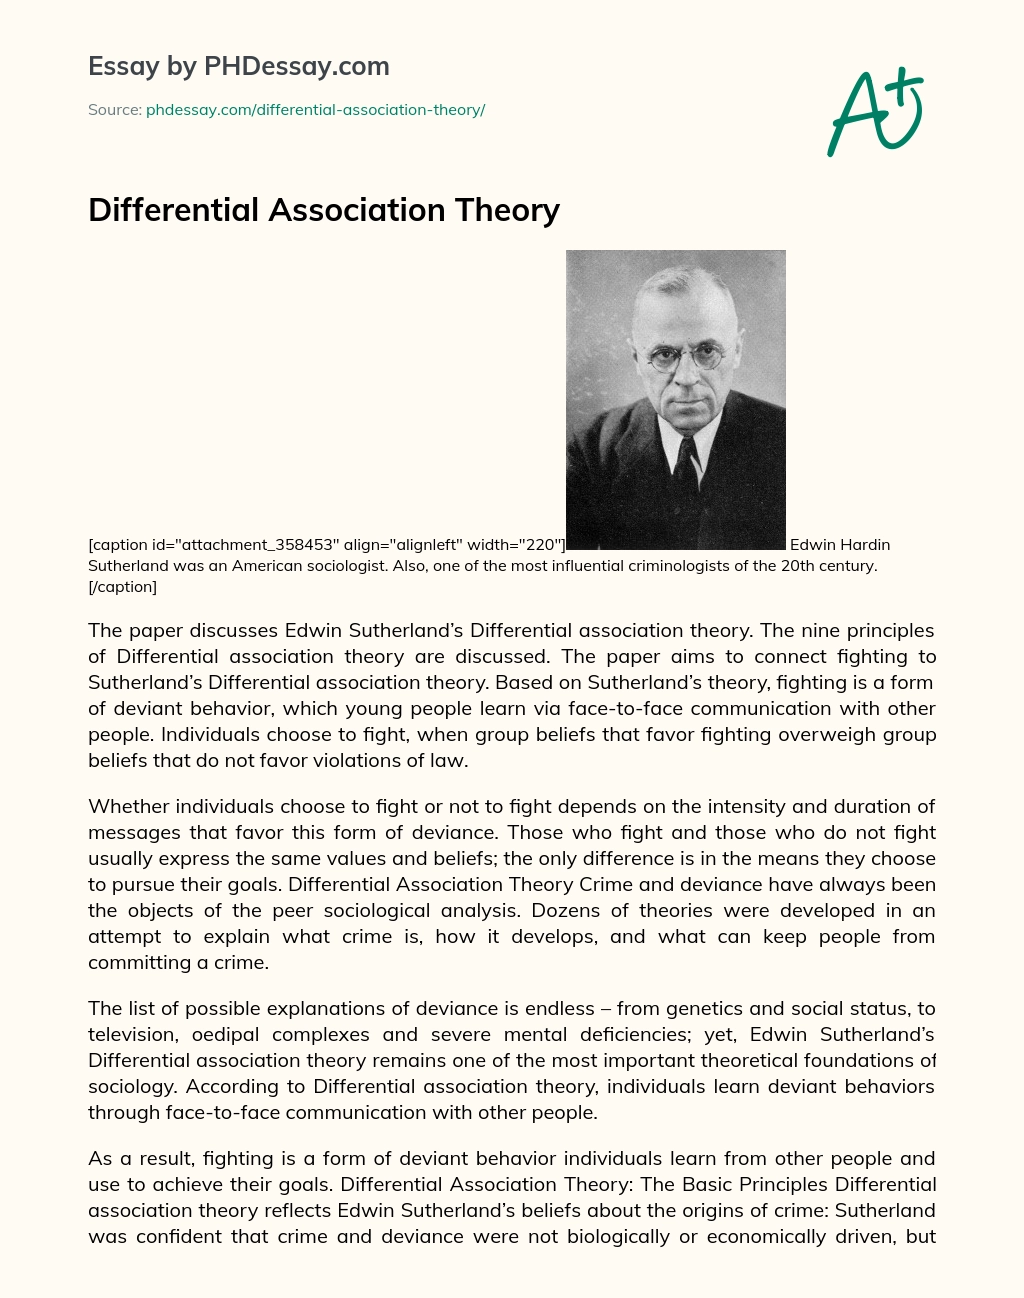 Differential Association Theory essay